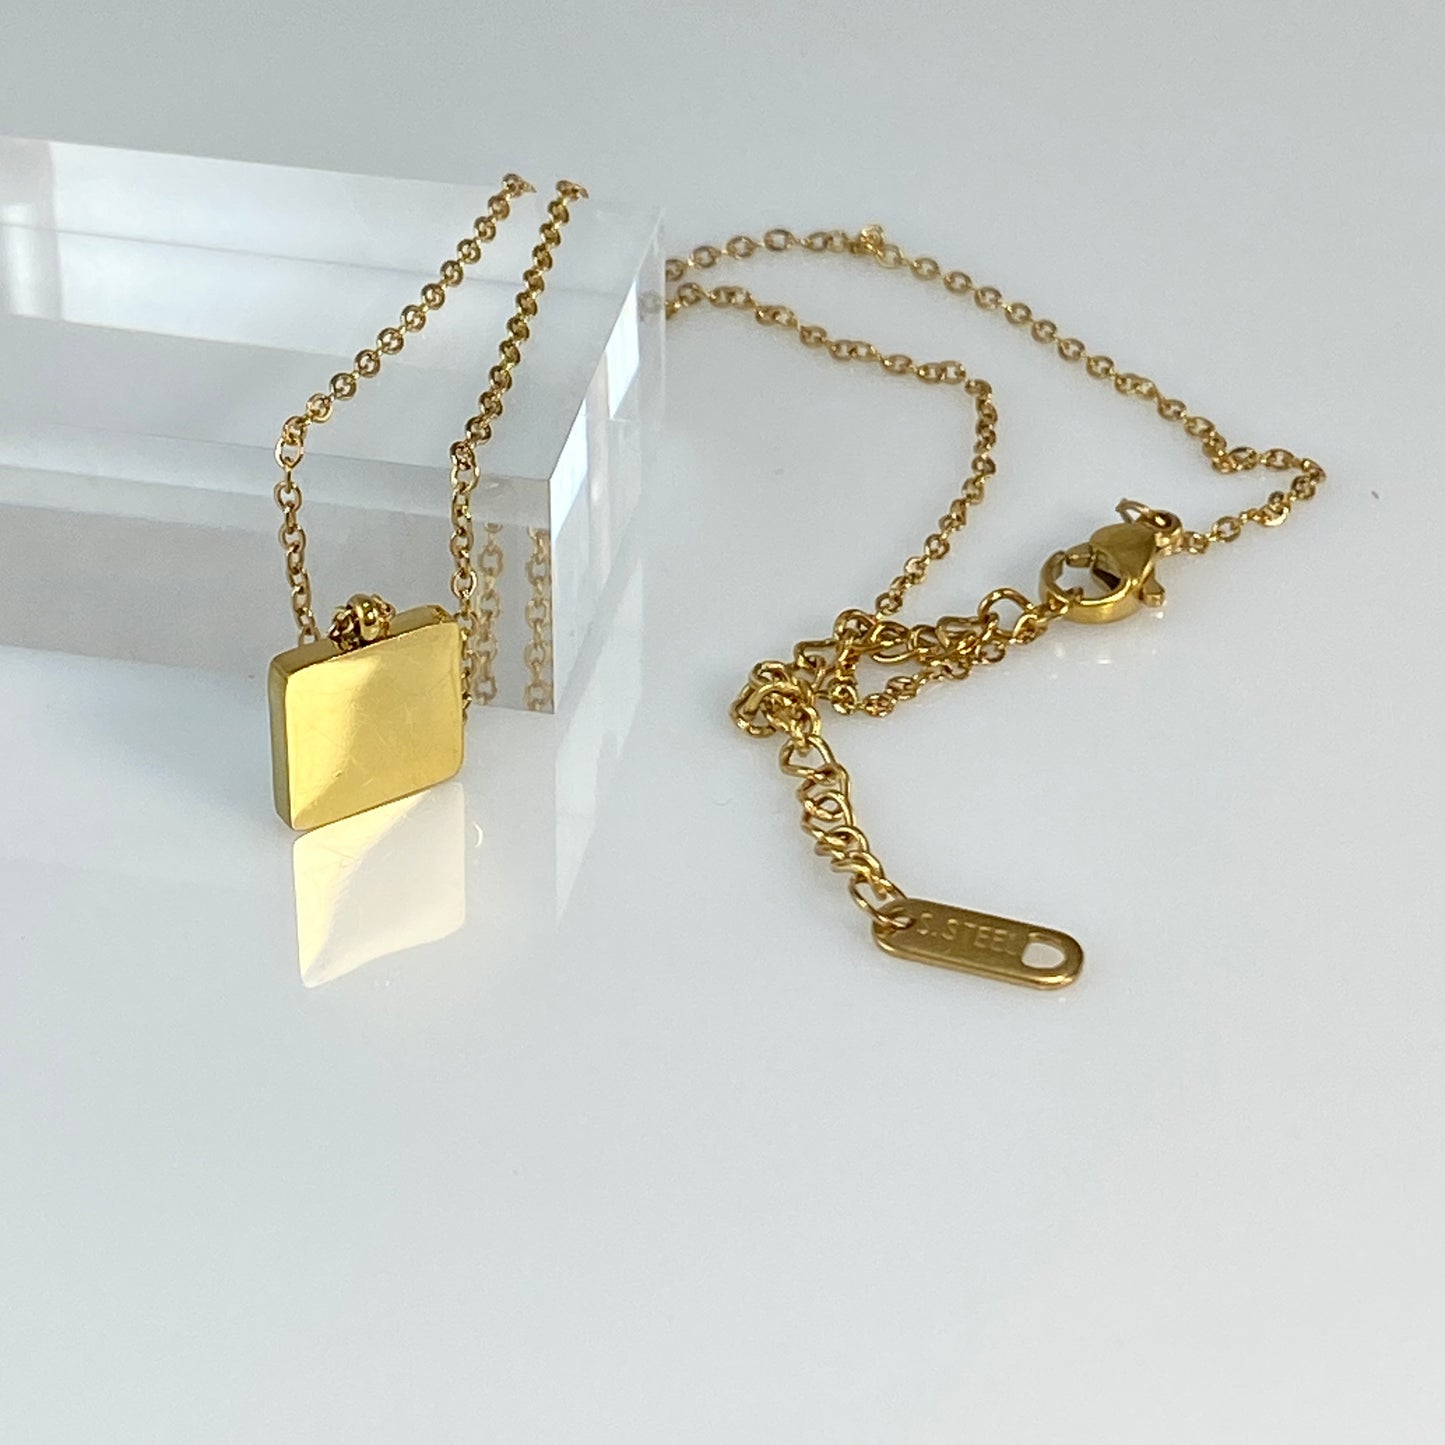 18 kt Gold Plated Heart in Mother of Pearl Pendant on Stainless Steel Cable Chain Link Necklace